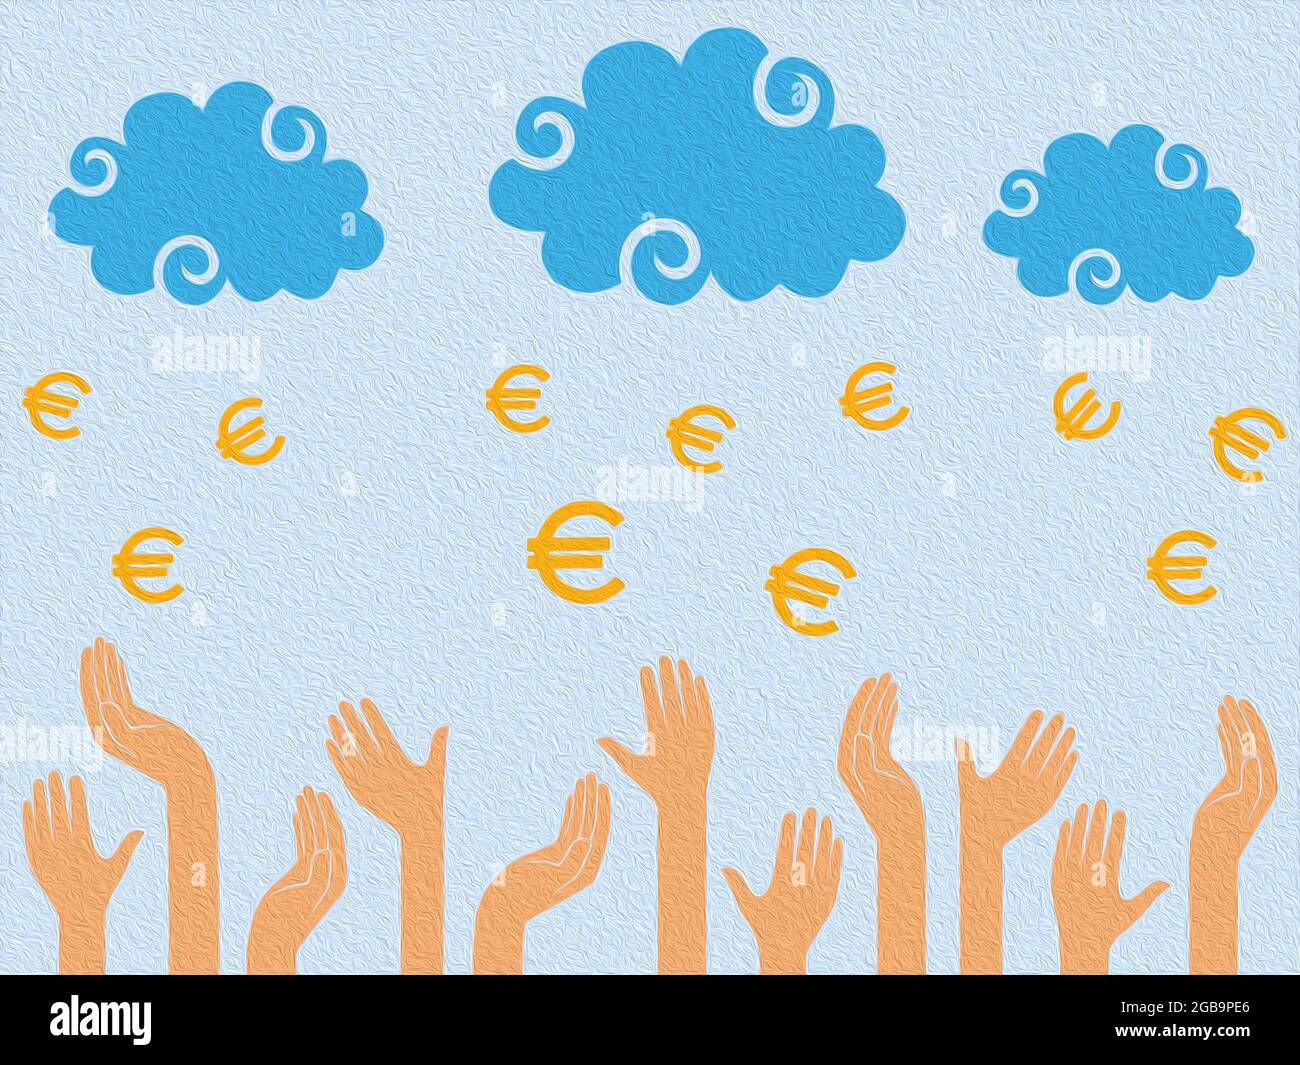 Euro Money falling from the clouds in the human hands, stylised conceptual colorful illustration Stock Photo